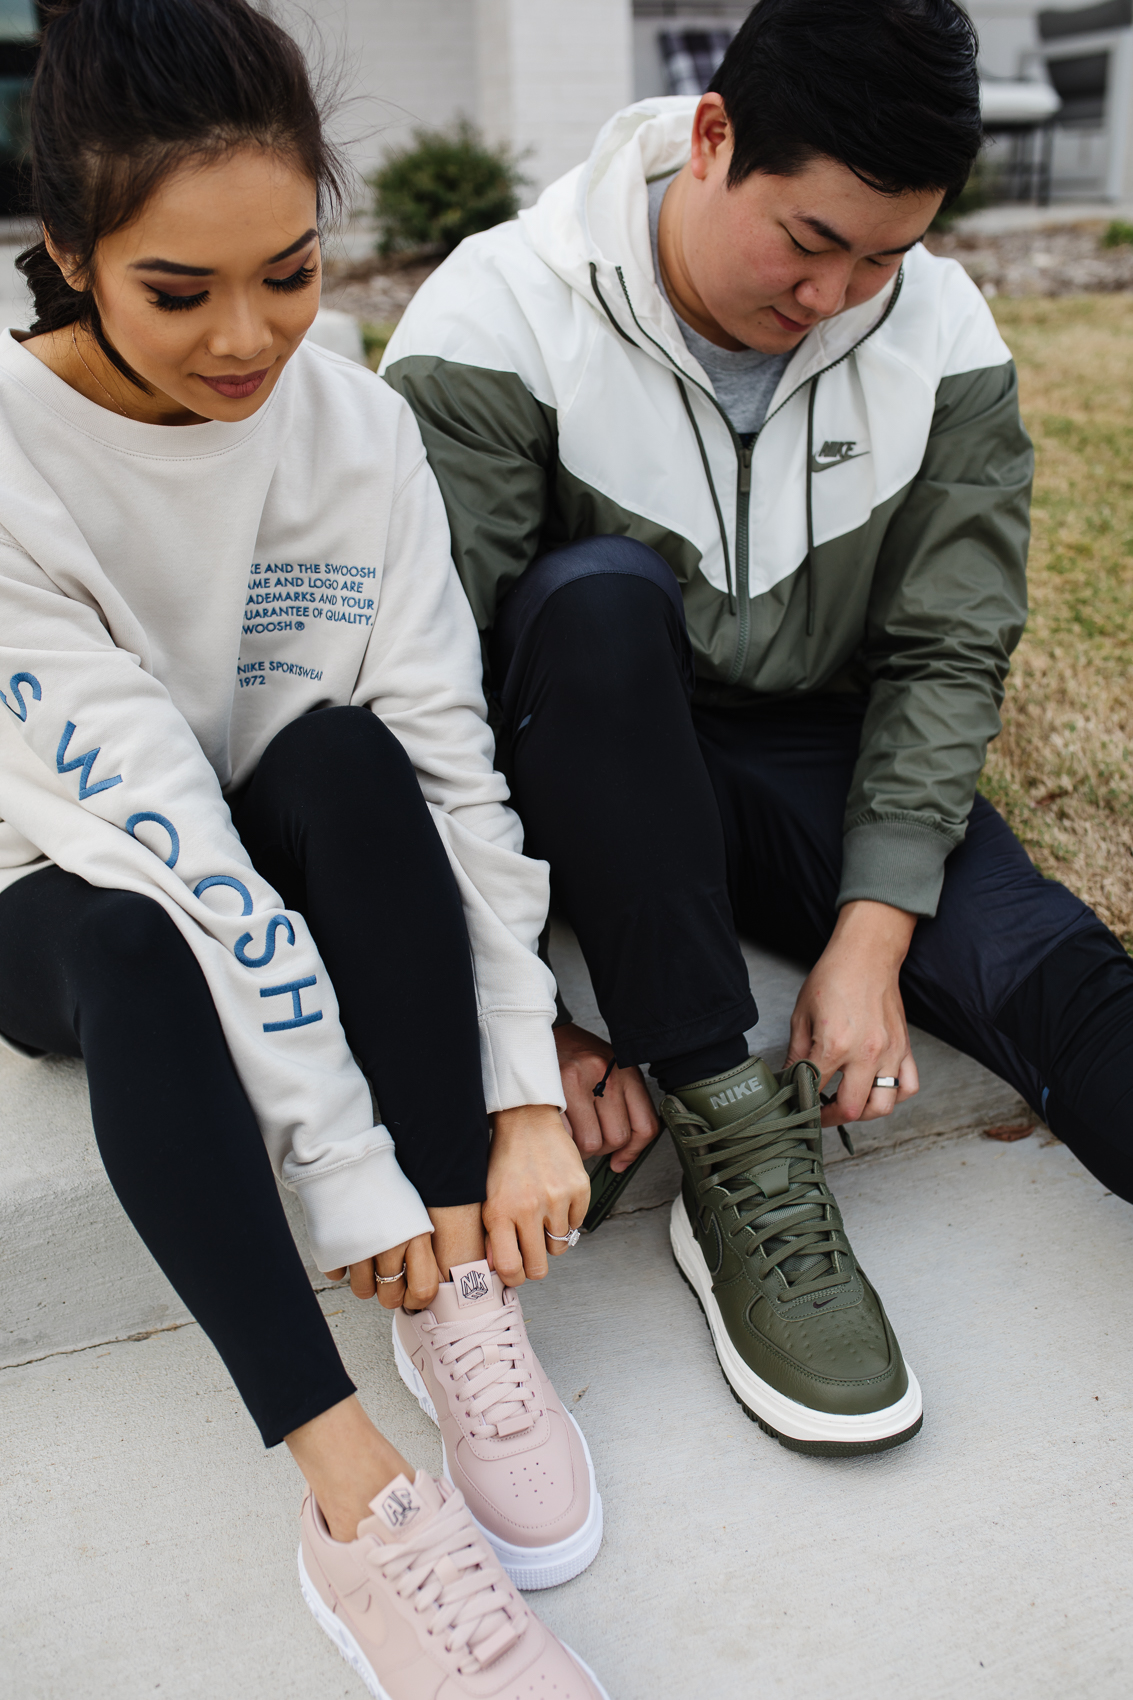 nike outfits for him and her